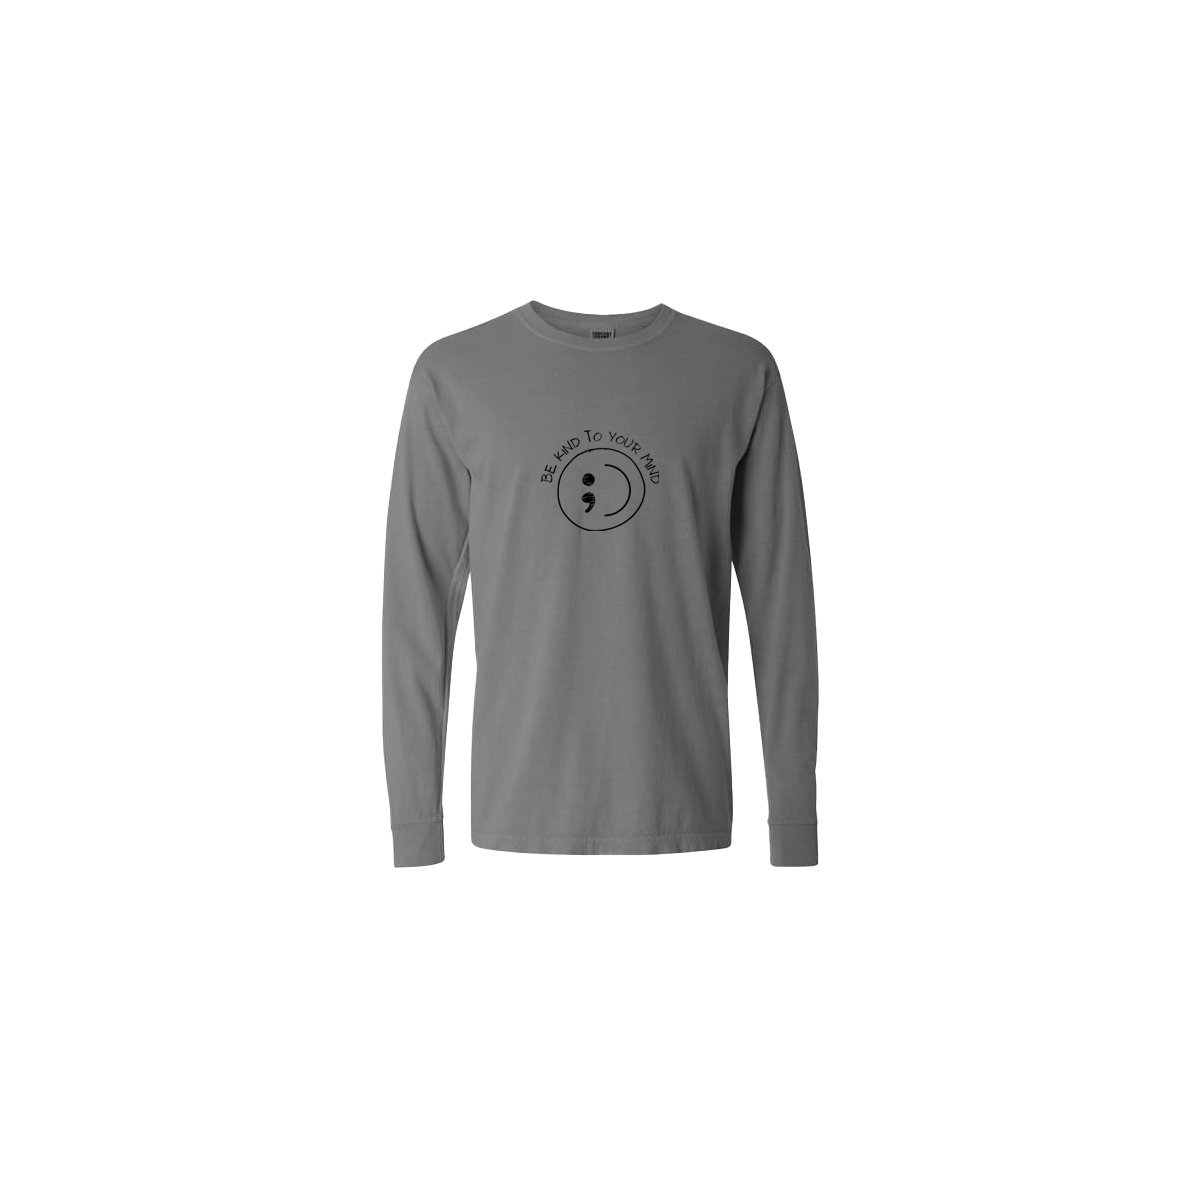 Be Kind To Your Mind Smiley Face Embroidered Grey Long Sleeve Tshirt - Mental Health Awareness Clothing